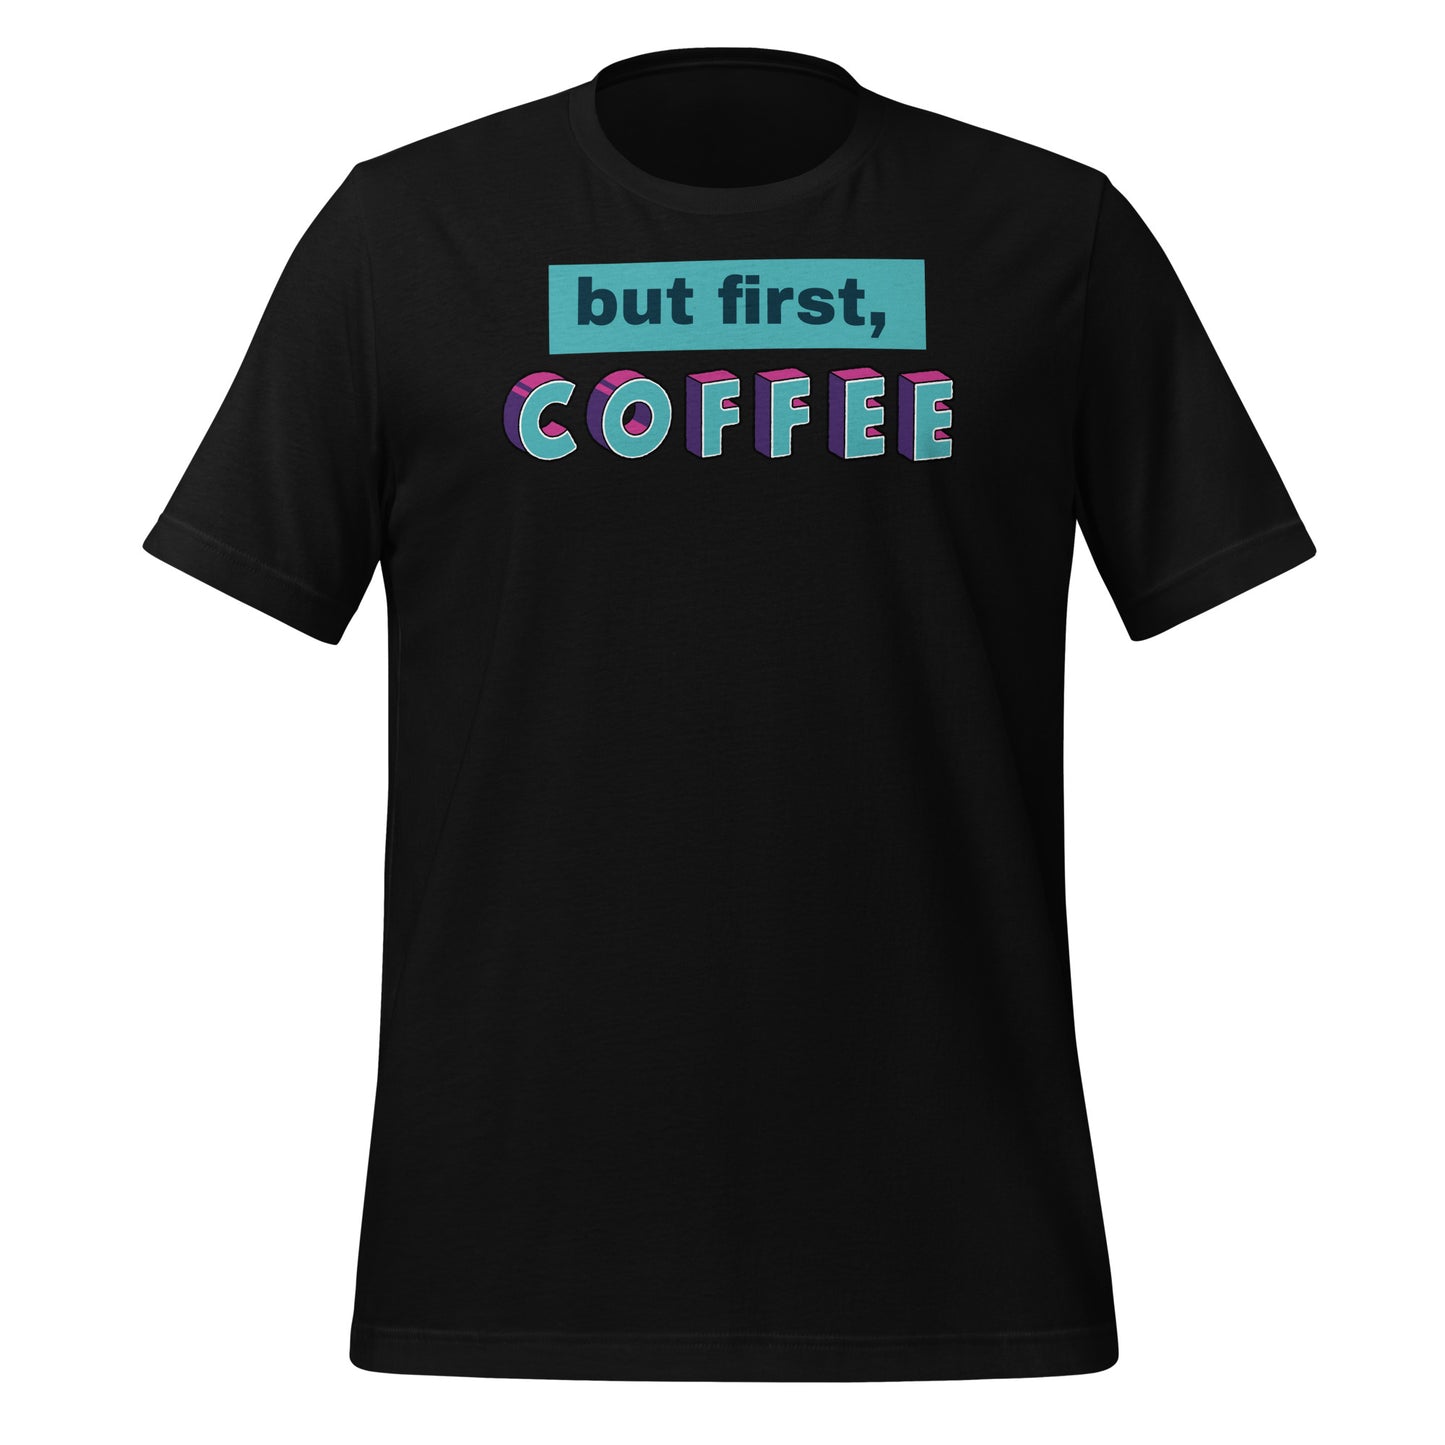 Get Energized with our Stylish 'But First, Coffee' T-shirts